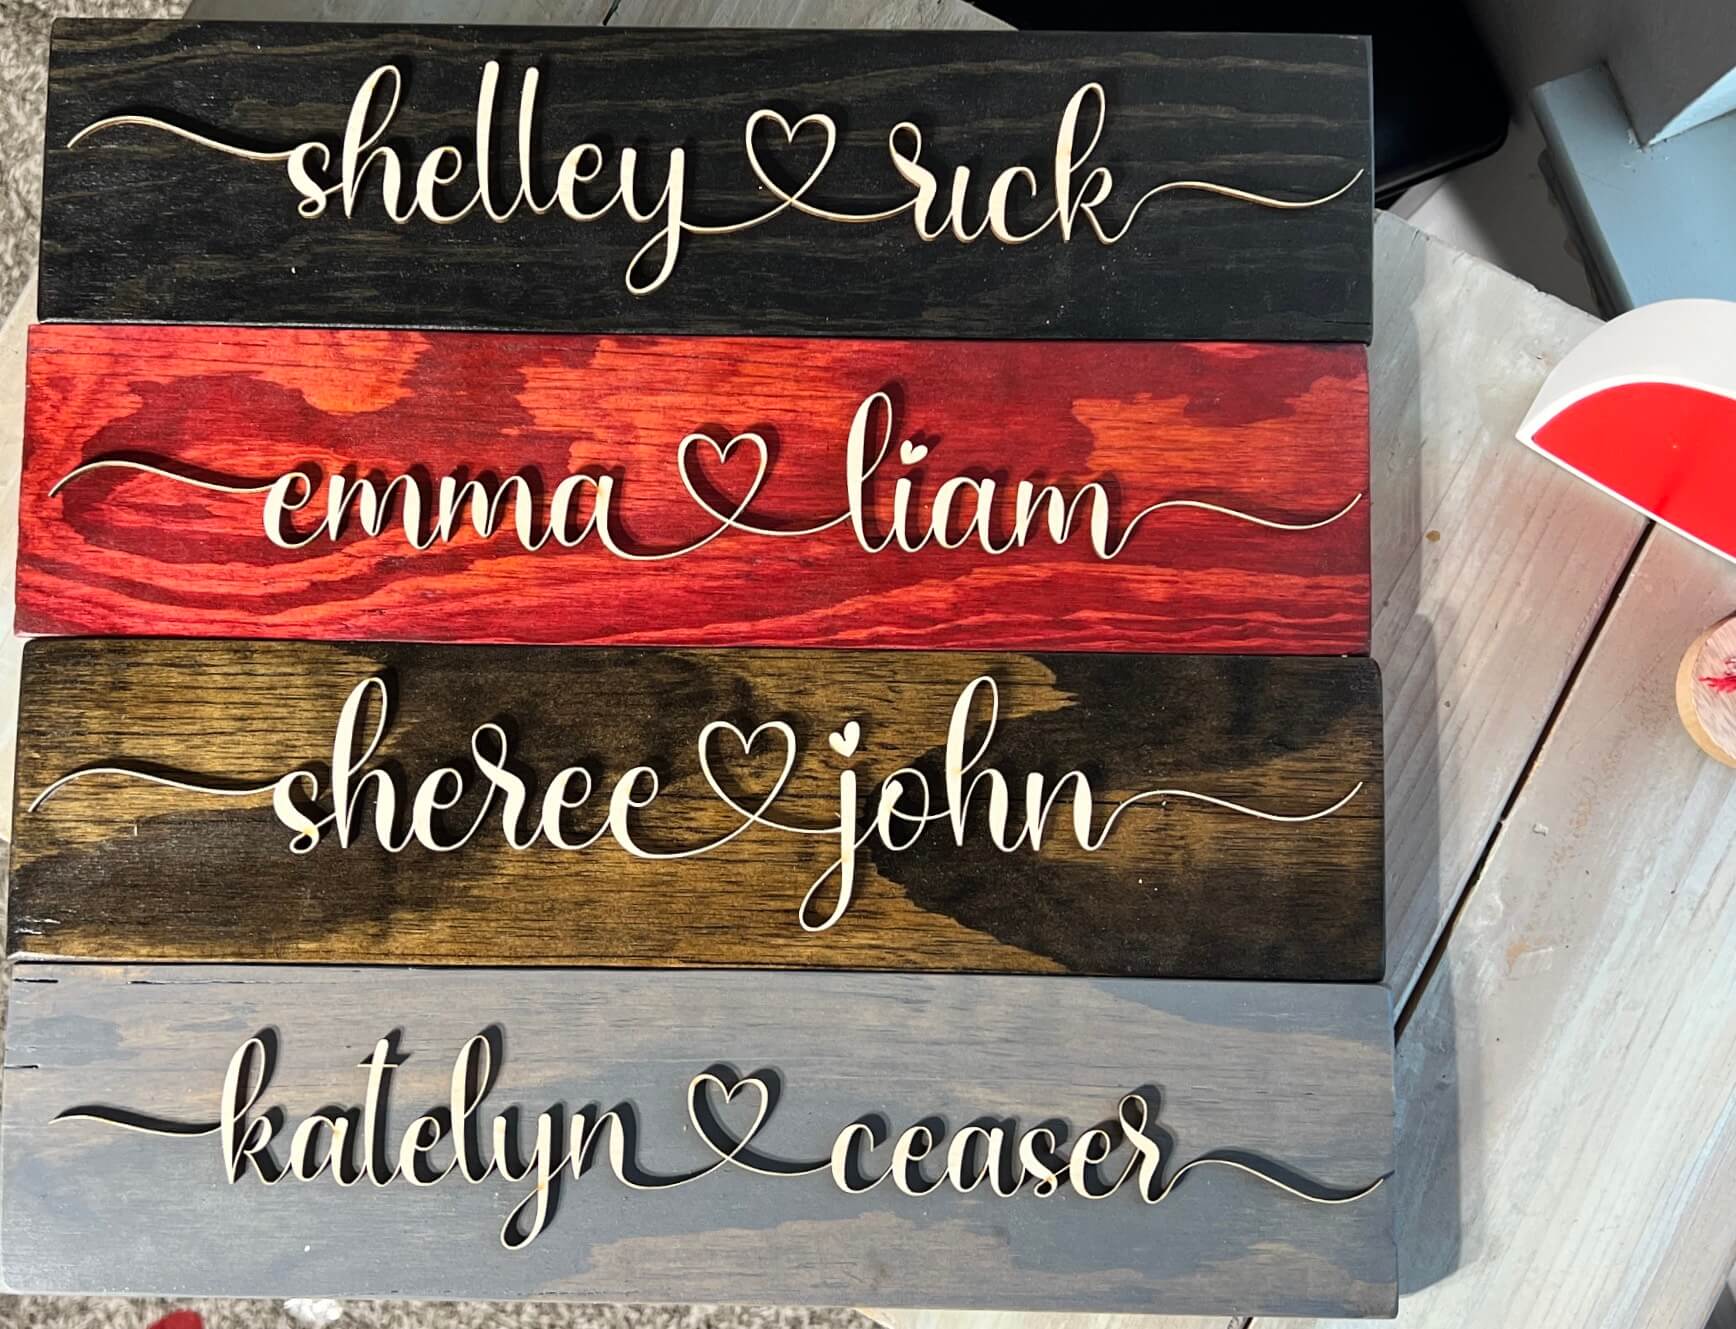 Add a touch of warmth to your space with this heartwarming couples name sign."